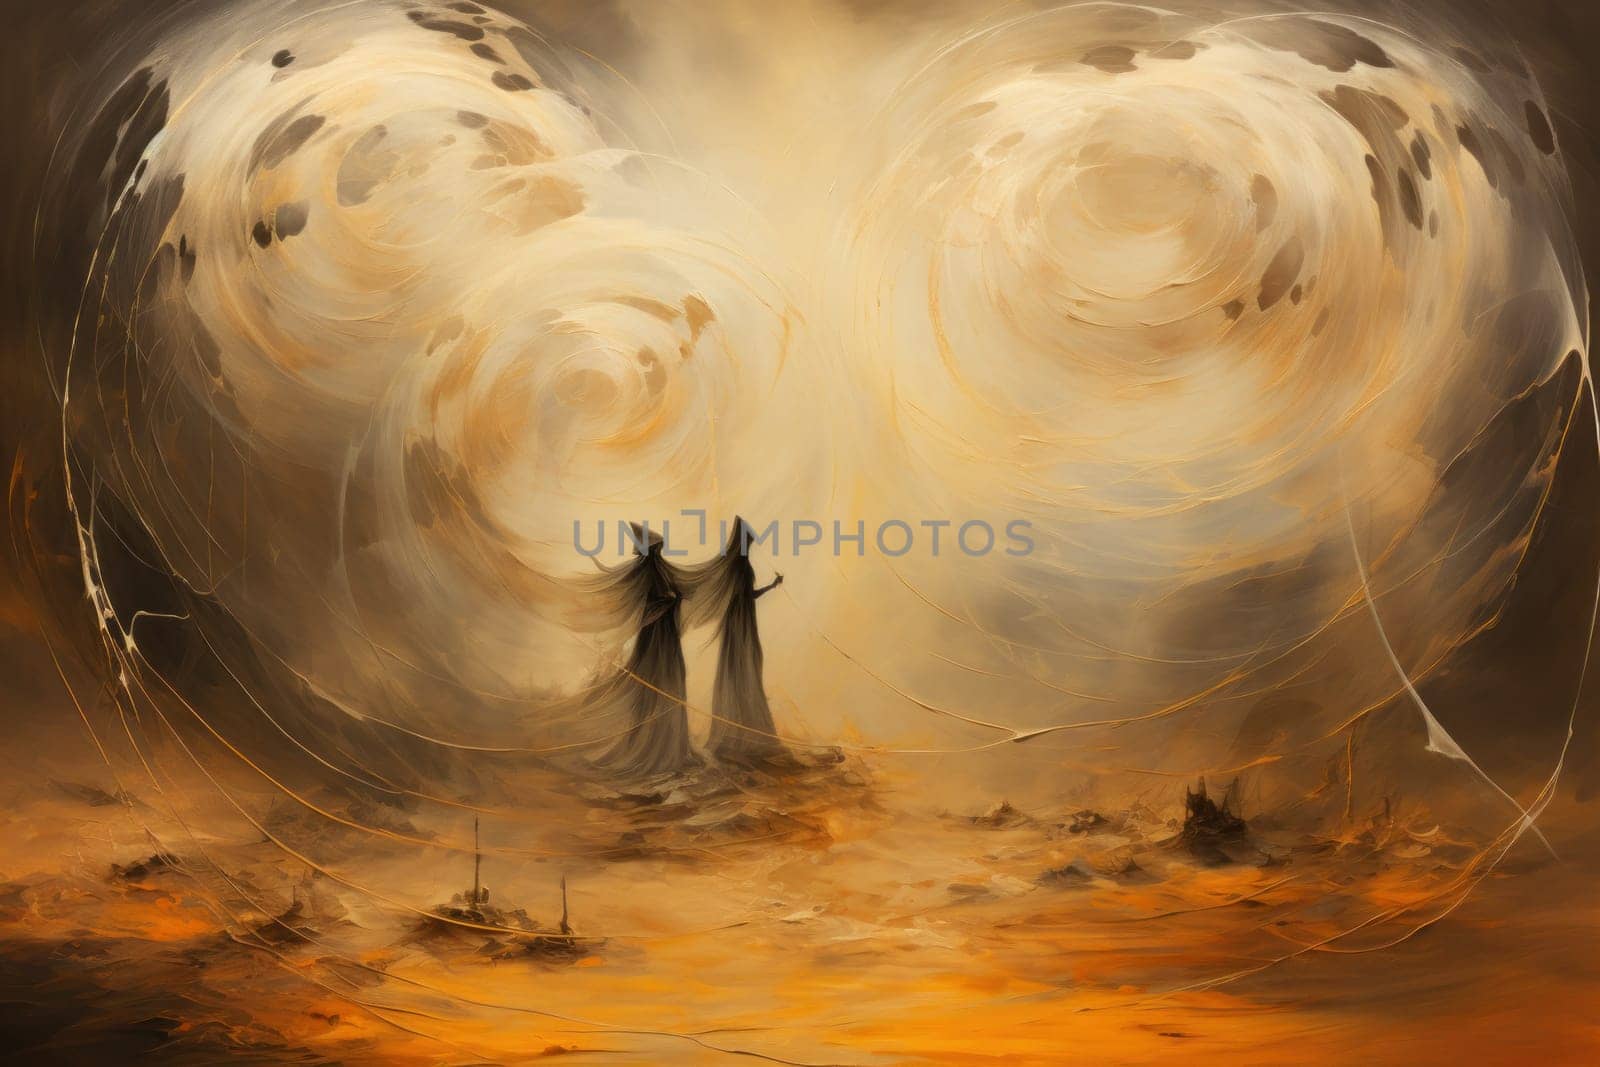 Immerse yourself in the realm of fantasy and behold the awe-inspiring sight of whirling sandstorm djinns.